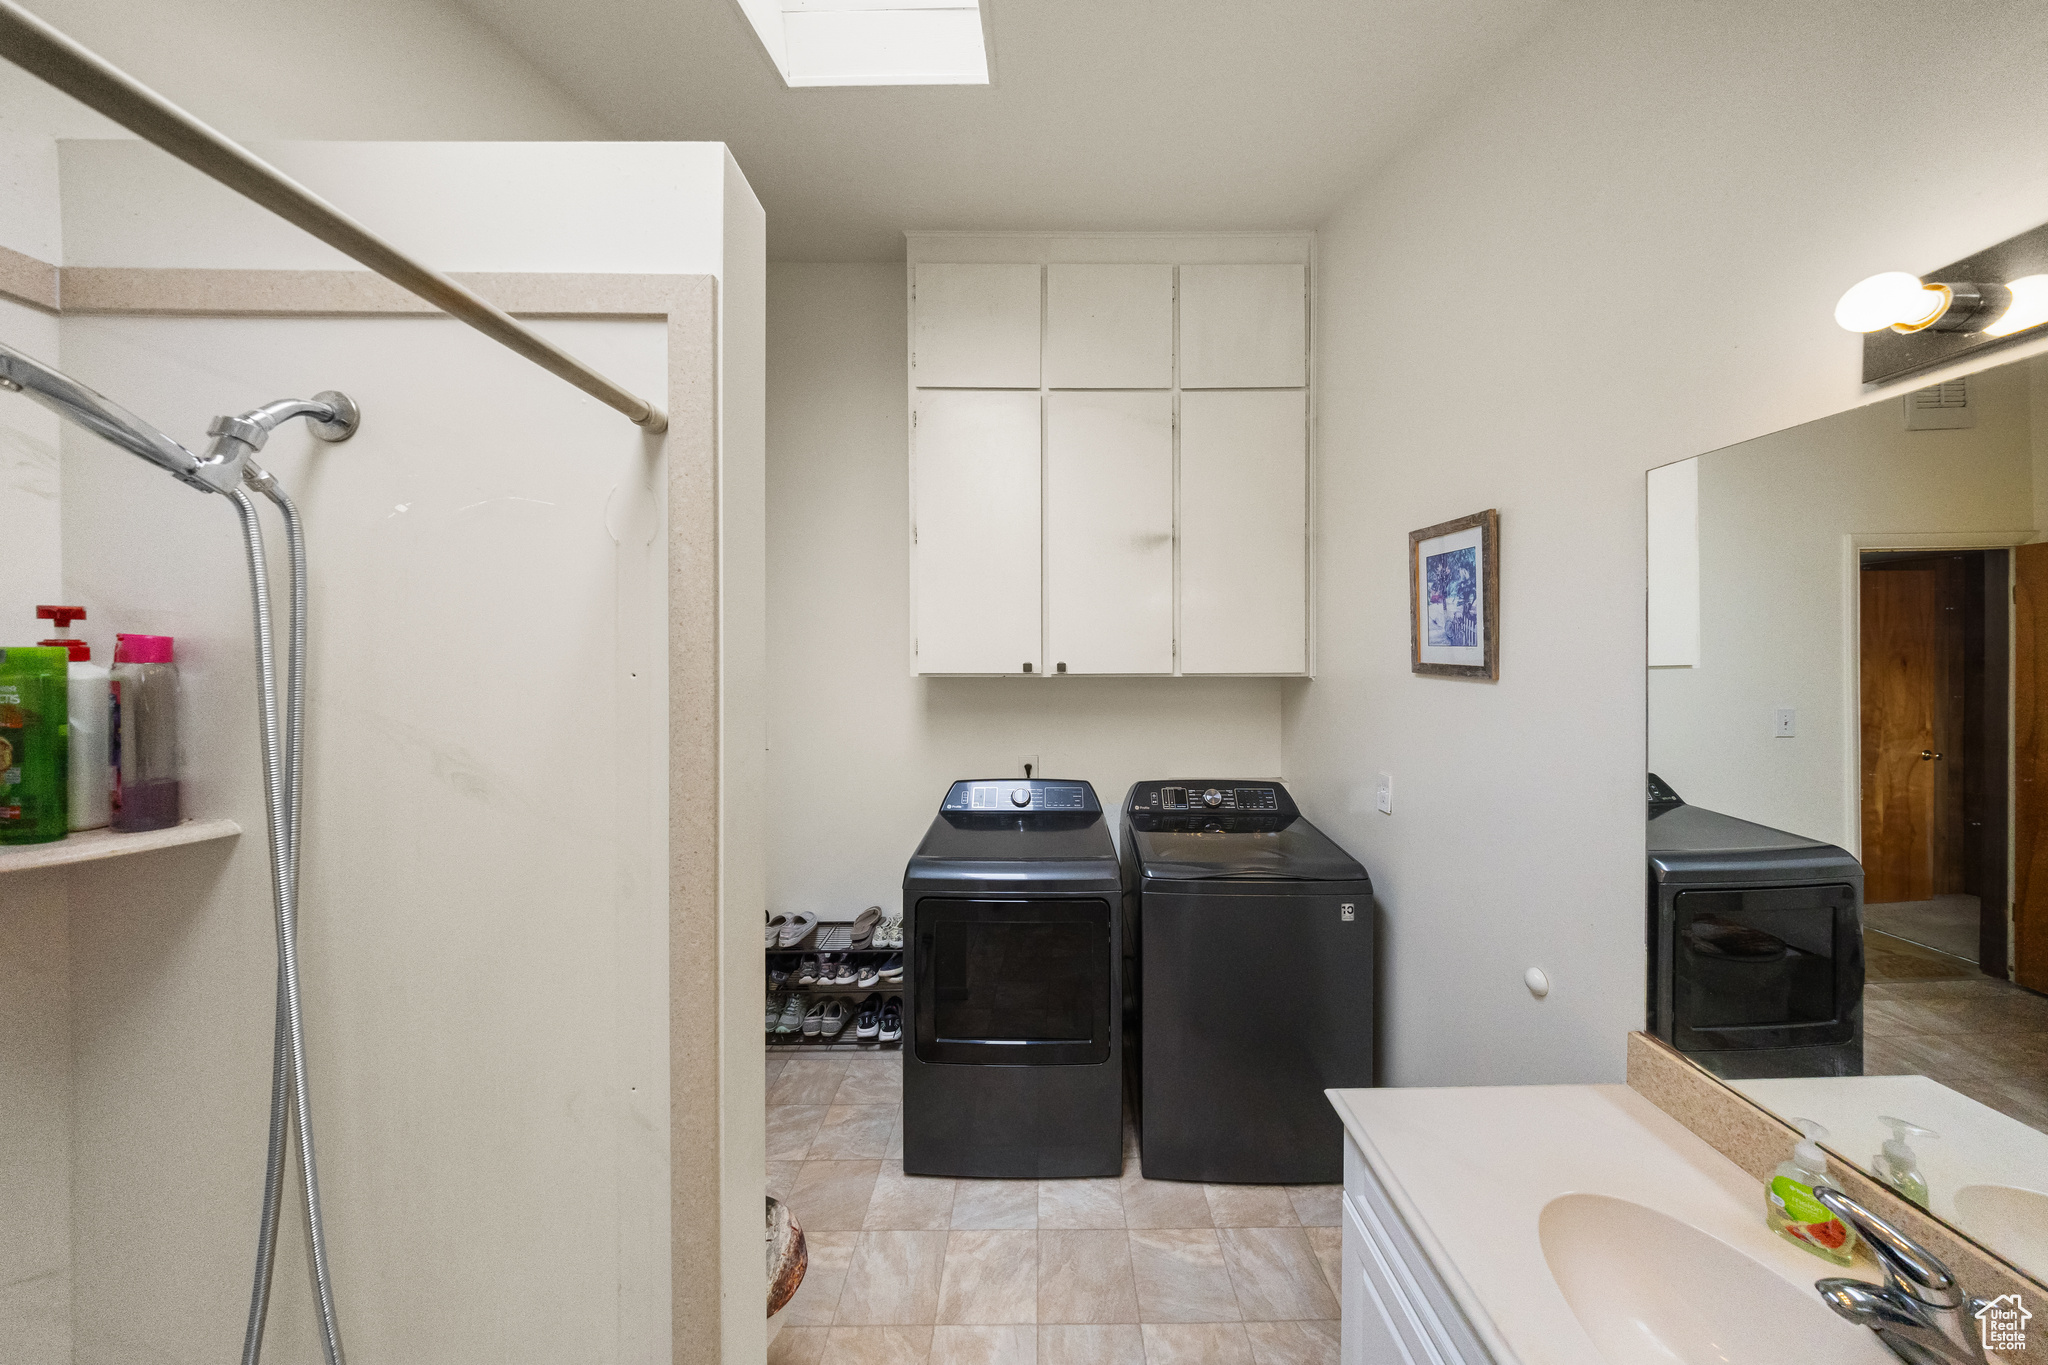 Laundry area featuring sink, independent washer and dryer, and light tile flooring